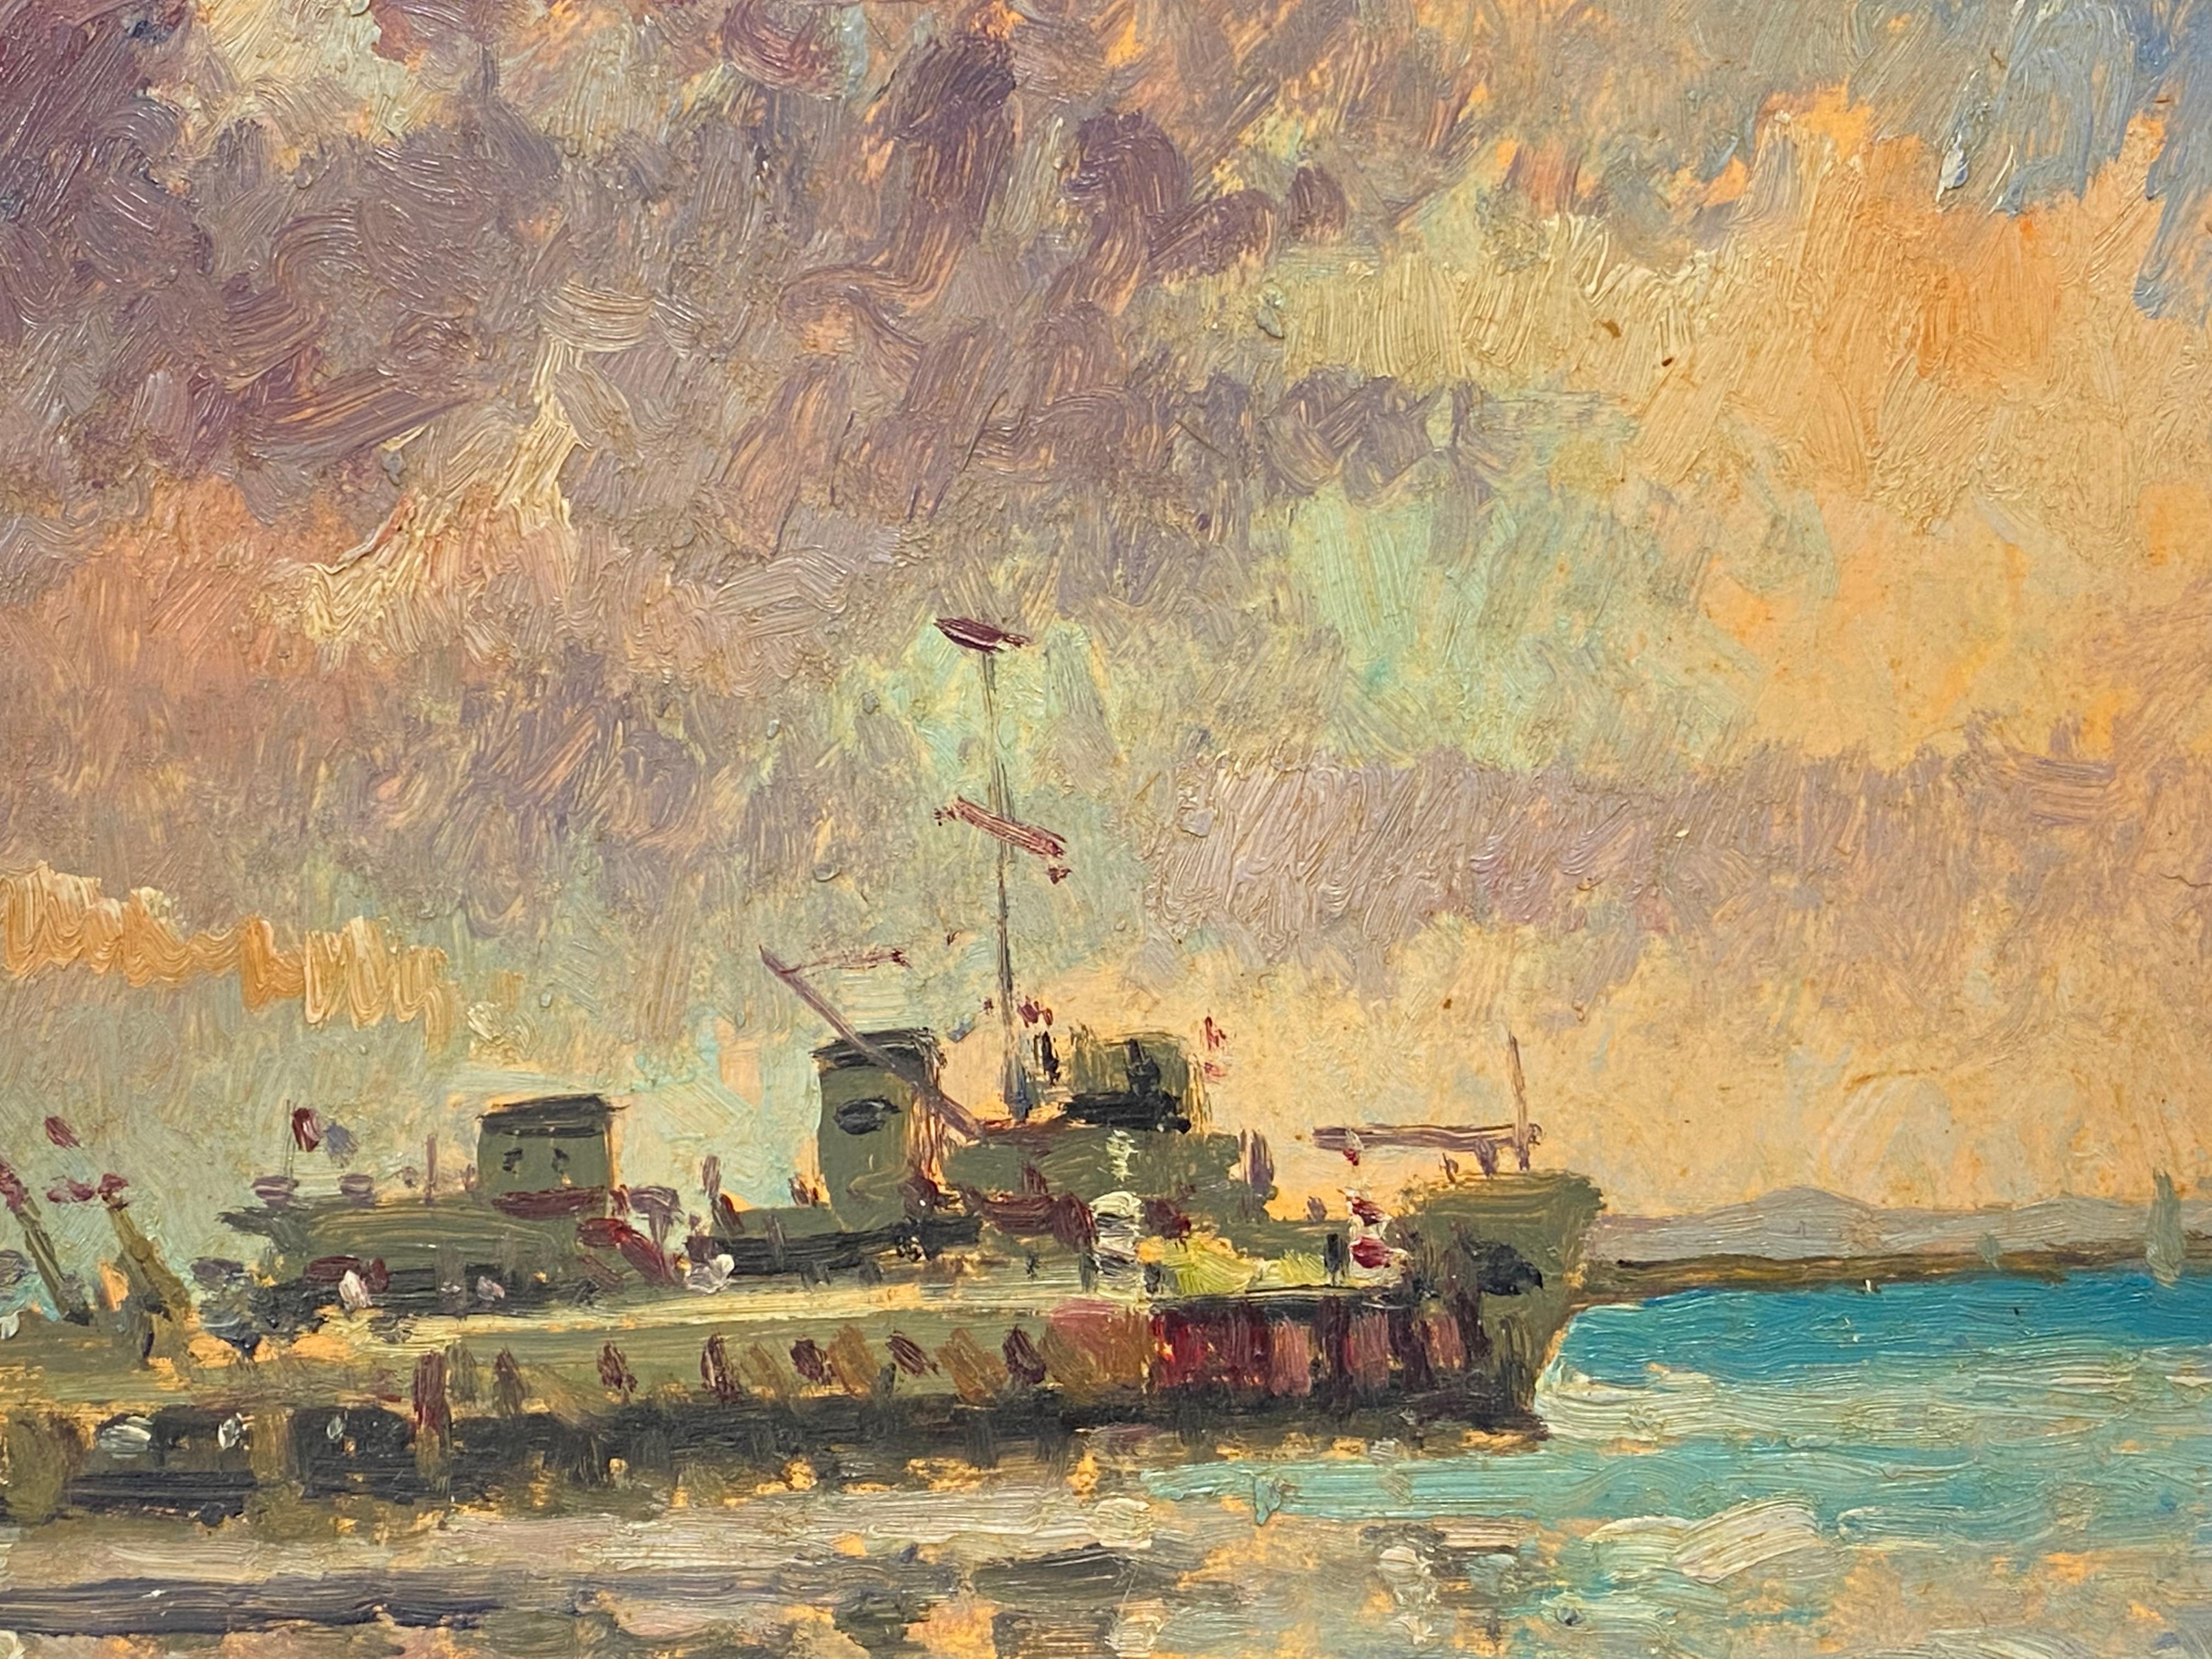 Shipping
by Maurice Mazeilie (French)
oil painting on card, unframed
stamped verso
inscribed verso

painting: 6 x 8.5 inches

A delightful original oil painting by the 20th century French Impressionist artist, Maurice Mazeilie. The painting